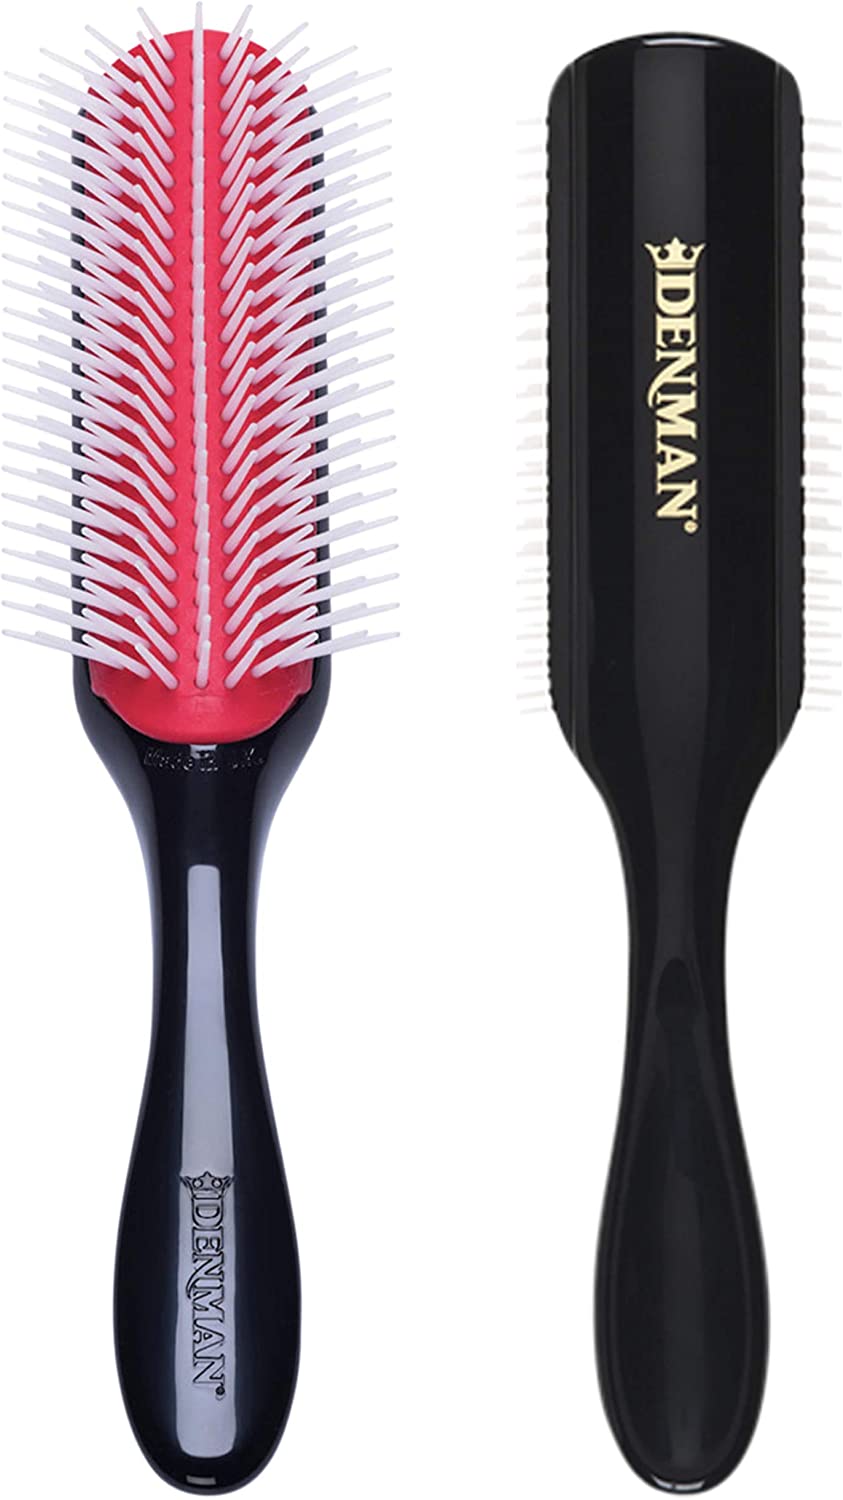 Denman Curly Hair Brush D4 (Black & Red) 9 Row Styling [...]